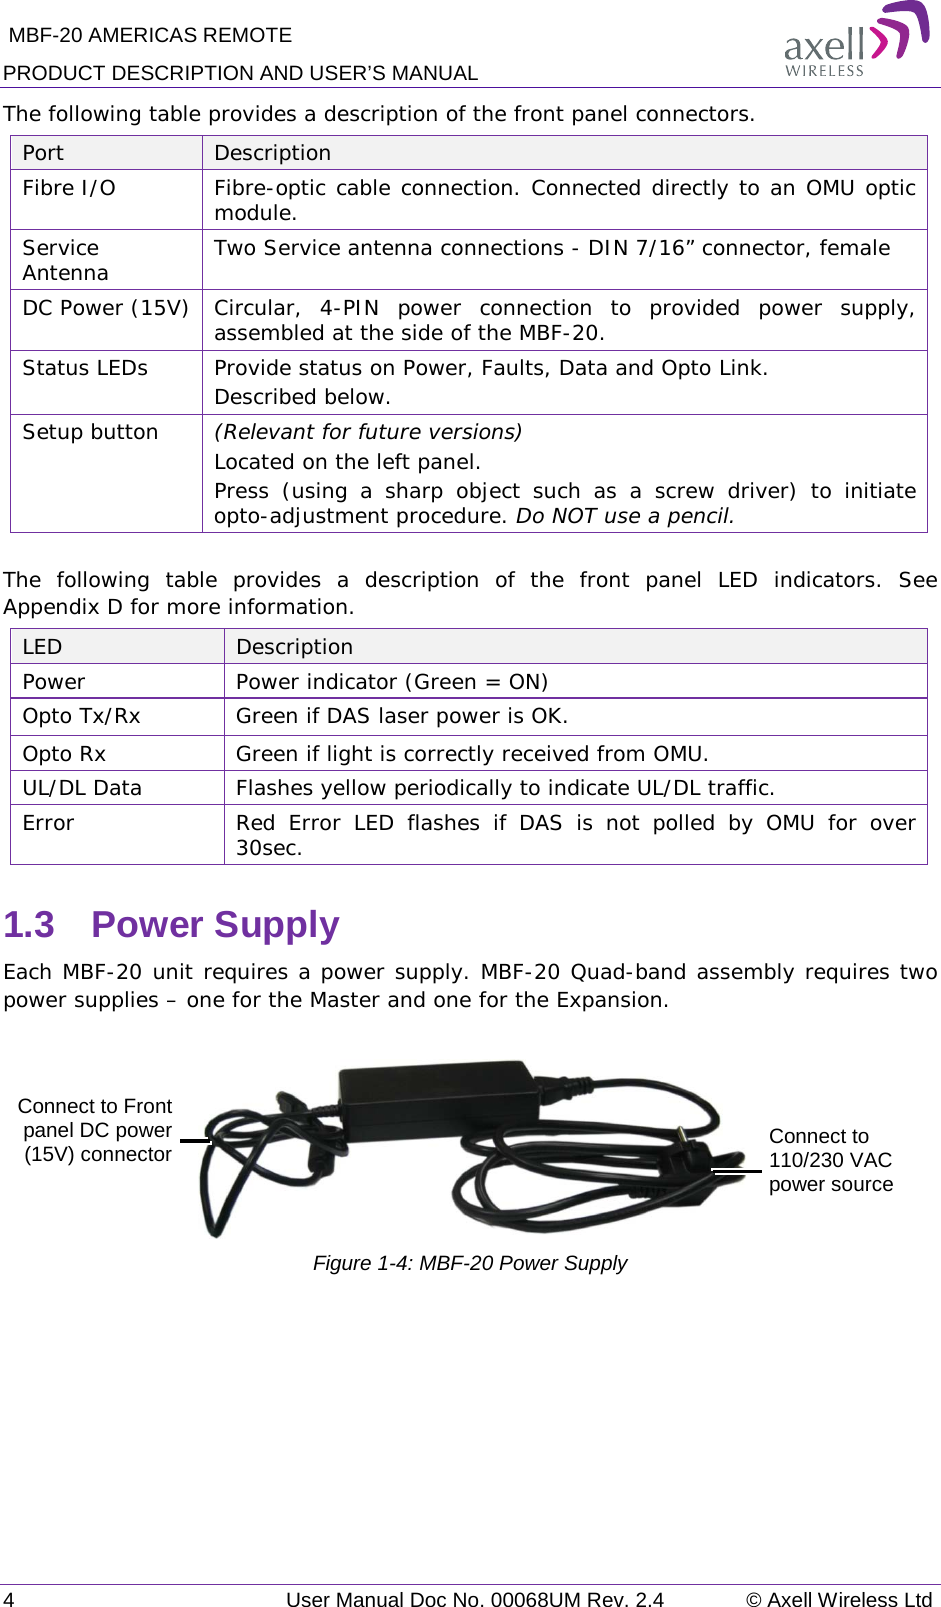  MBF-20 AMERICAS REMOTE PRODUCT DESCRIPTION AND USER’S MANUAL 4   User Manual Doc No. 00068UM Rev. 2.4 © Axell Wireless Ltd The following table provides a description of the front panel connectors. Port Description  Fibre I/O Fibre-optic cable connection. Connected directly to an OMU optic module. Service Antenna Two Service antenna connections - DIN 7/16” connector, female DC Power (15V) Circular, 4-PIN power connection to provided power supply, assembled at the side of the MBF-20. Status LEDs Provide status on Power, Faults, Data and Opto Link. Described below. Setup button (Relevant for future versions)  Located on the left panel.  Press  (using a sharp object such as a screw driver) to  initiate opto-adjustment procedure. Do NOT use a pencil.  The following table provides a description of the front panel LED indicators.  See Appendix D for more information. LED Description  Power Power indicator (Green = ON) Opto Tx/Rx Green if DAS laser power is OK. Opto Rx Green if light is correctly received from OMU. UL/DL Data Flashes yellow periodically to indicate UL/DL traffic. Error Red Error LED flashes if DAS is not polled by OMU for over 30sec. 1.3  Power Supply Each MBF-20 unit requires a power supply. MBF-20 Quad-band assembly requires two power supplies – one for the Master and one for the Expansion.   Figure  1-4: MBF-20 Power Supply Connect to 110/230 VAC power source Connect to Front panel DC power (15V) connector 